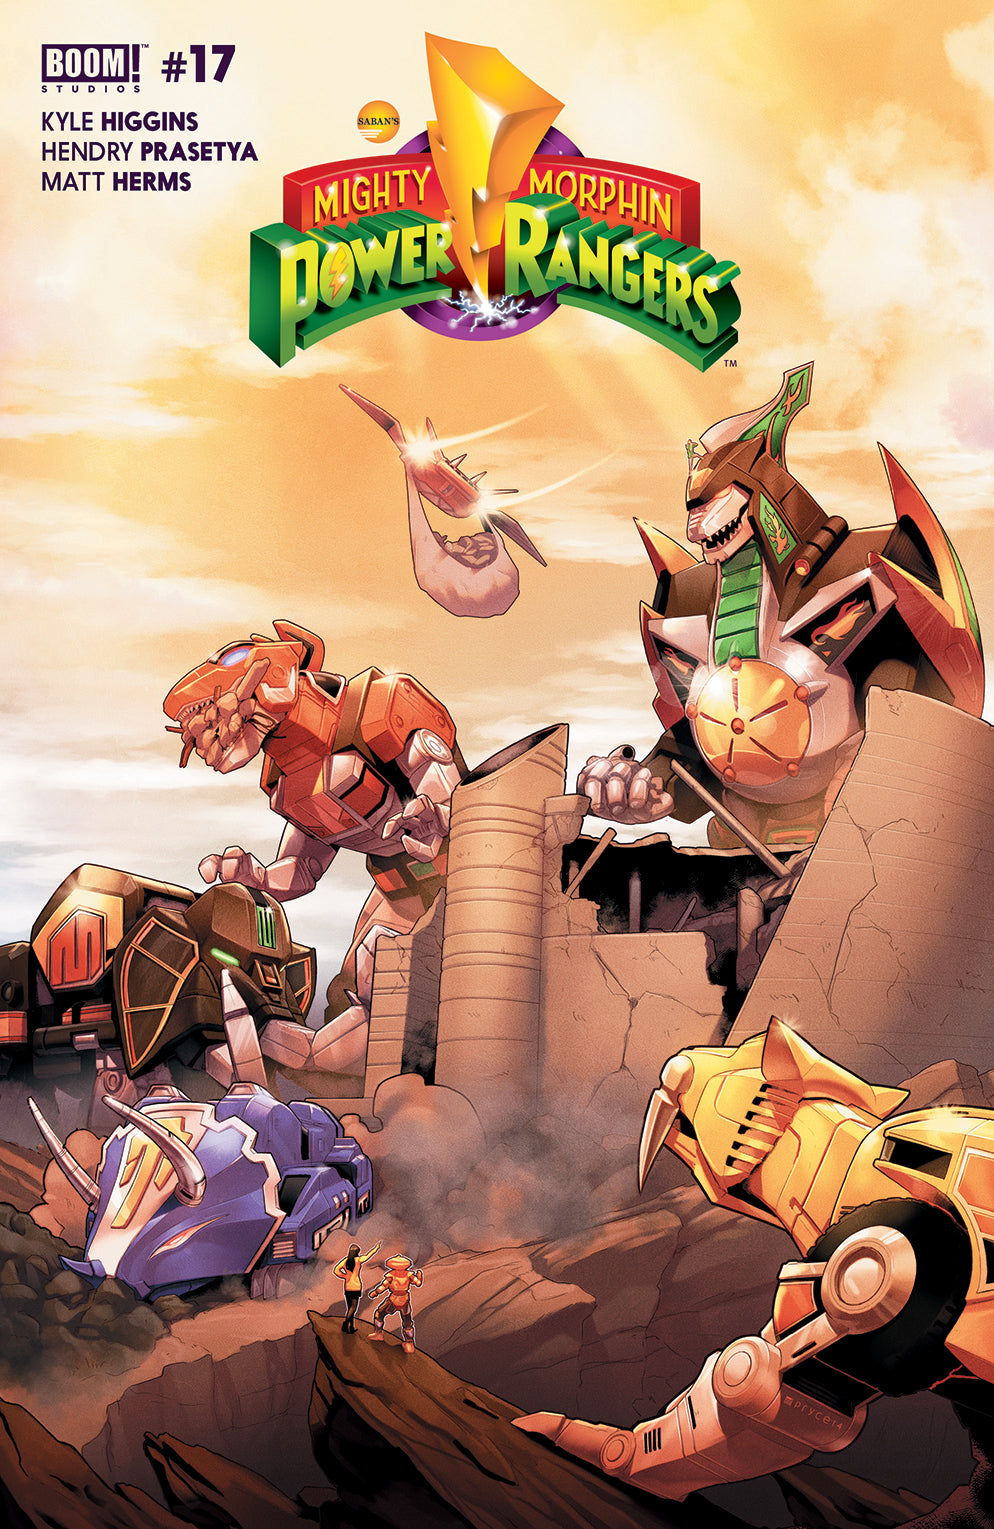 MIGHTY MORPHIN POWER RANGERS #17 A Boom 2017 Jamal Campbell Kyle Higgins